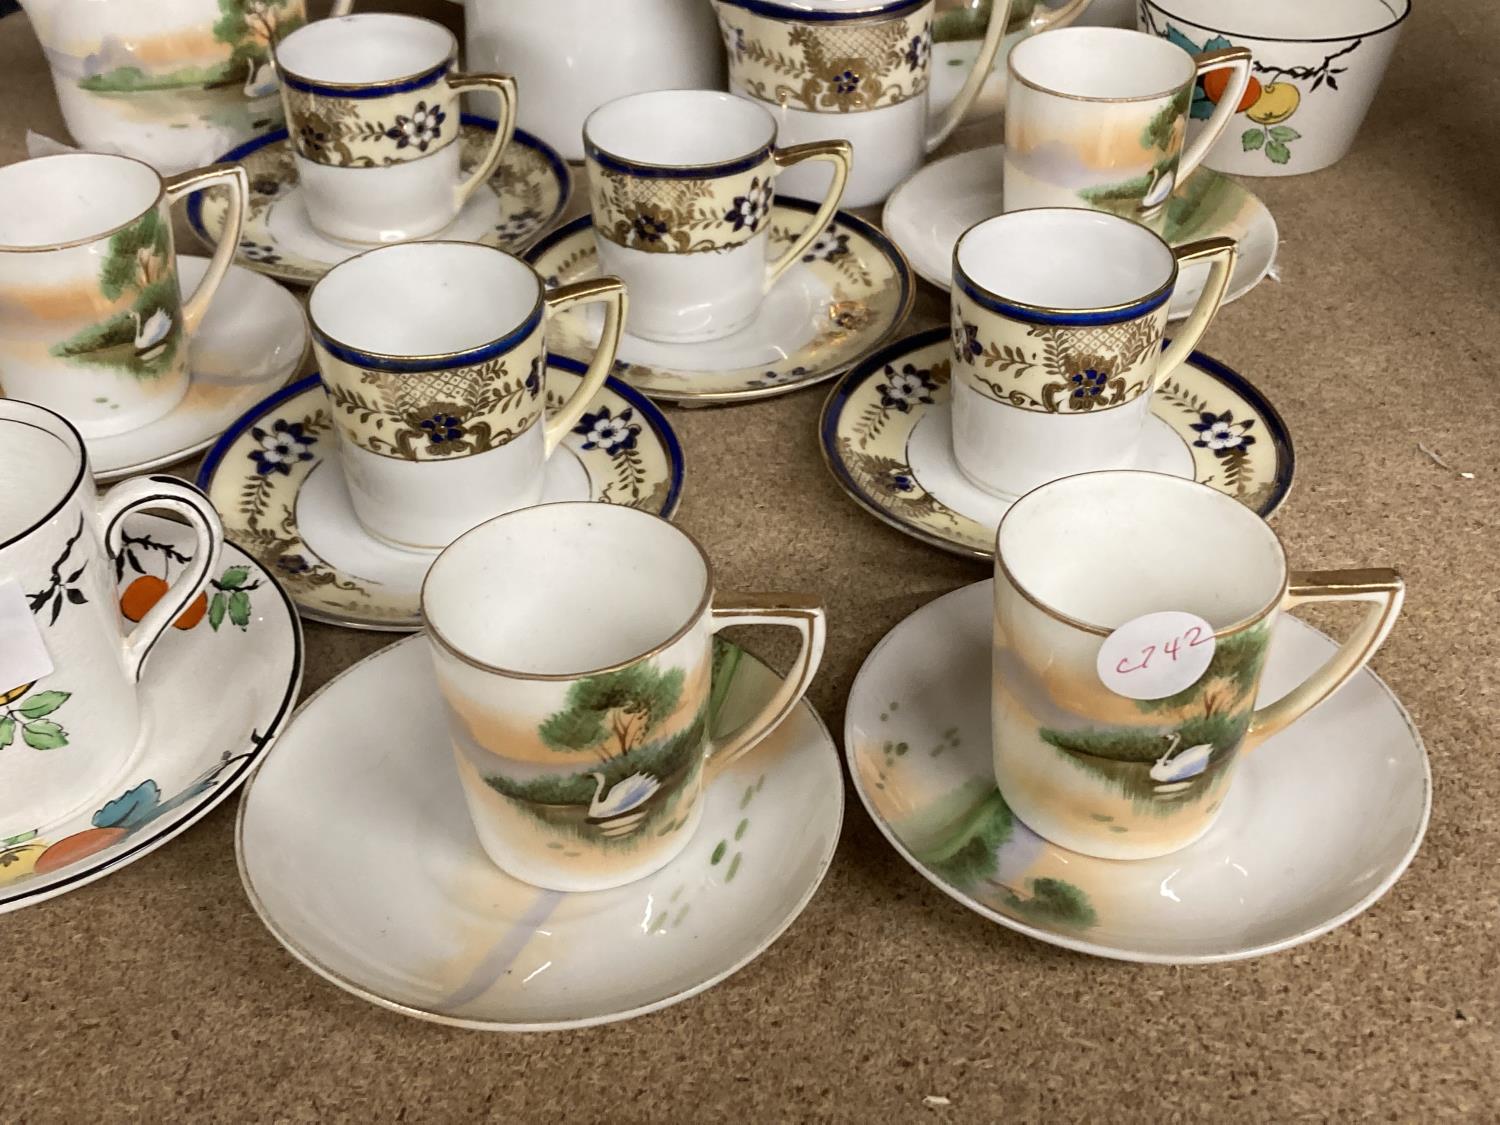 A QUANTITY OF TEAWARE TO INCLUDE A NORITAKE PART TEASET WITH COFFEE POT, CUPS, SAUCERS, CREAM JUG - Image 2 of 7